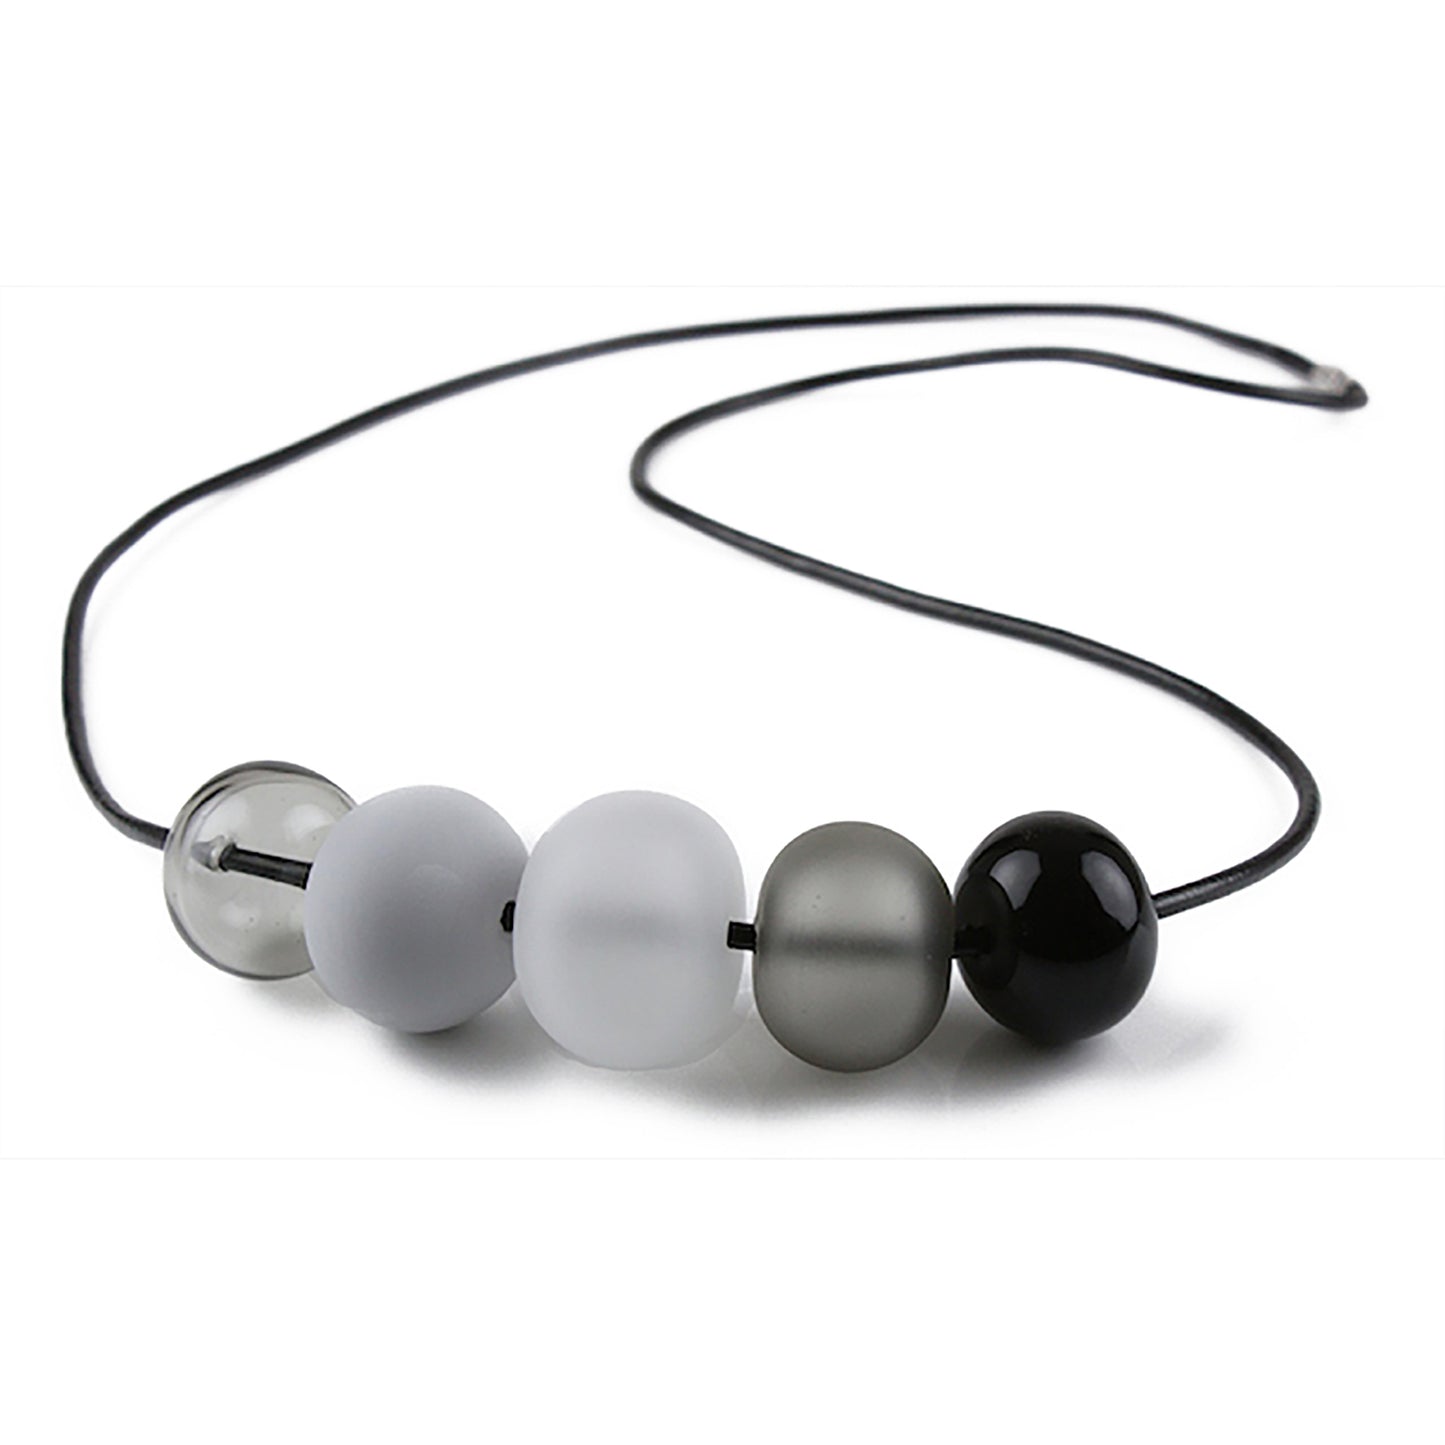 5 bubble bead necklace - black, white and gray